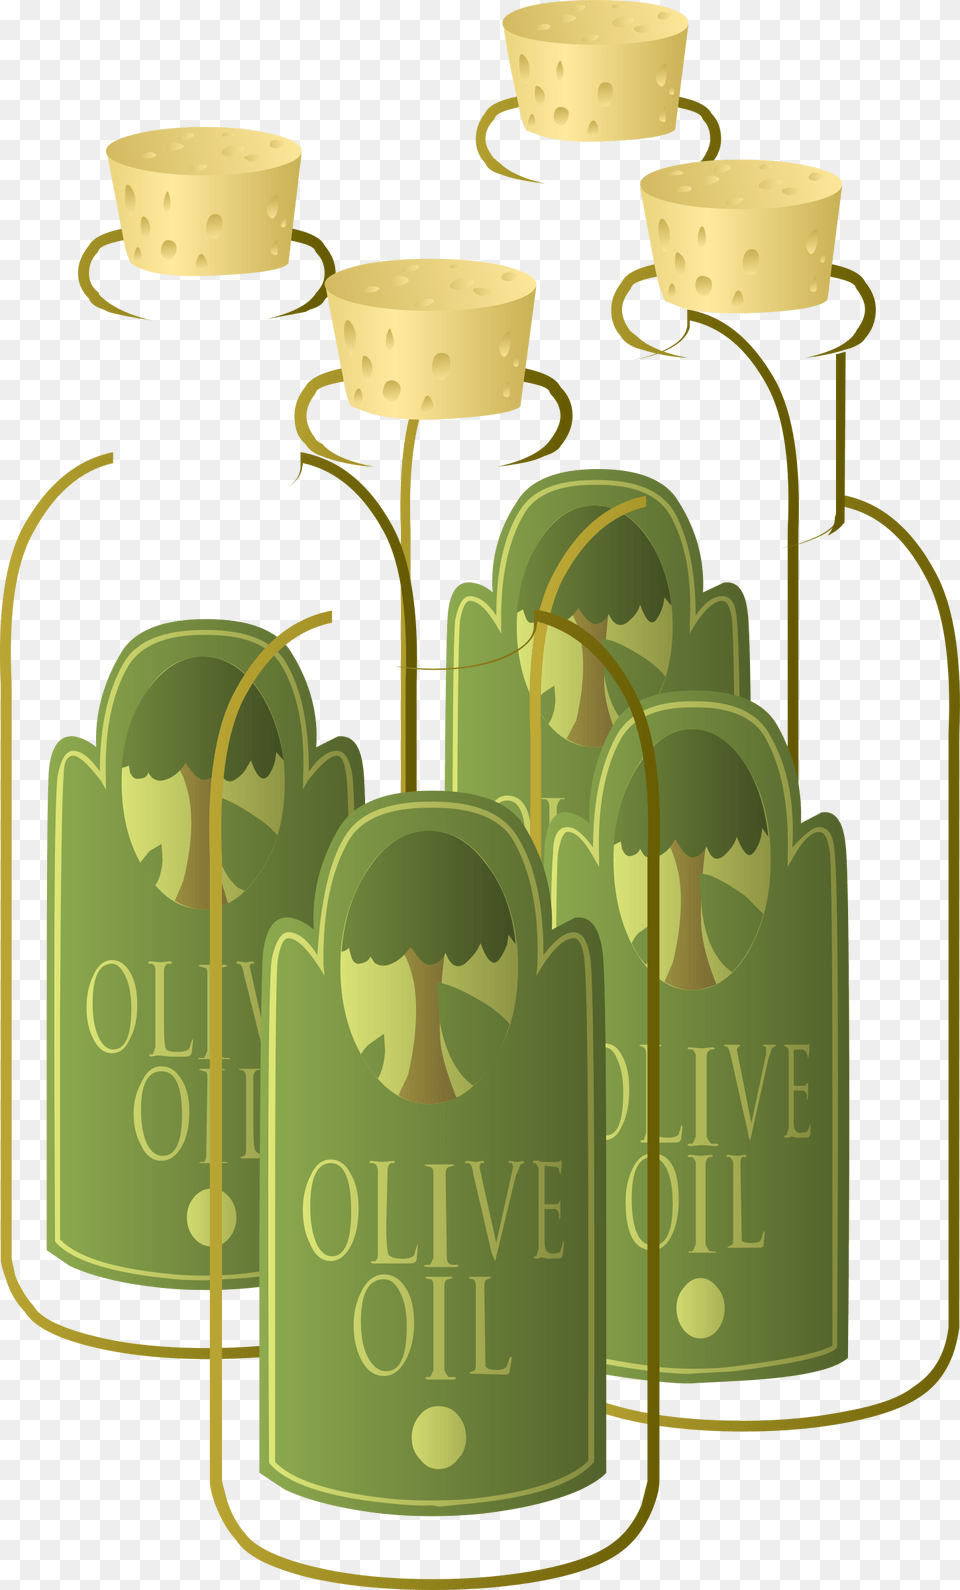 This Free Icons Design Of Food Olive Oil, Bottle, Cup, Wine Bottle, Alcohol Png